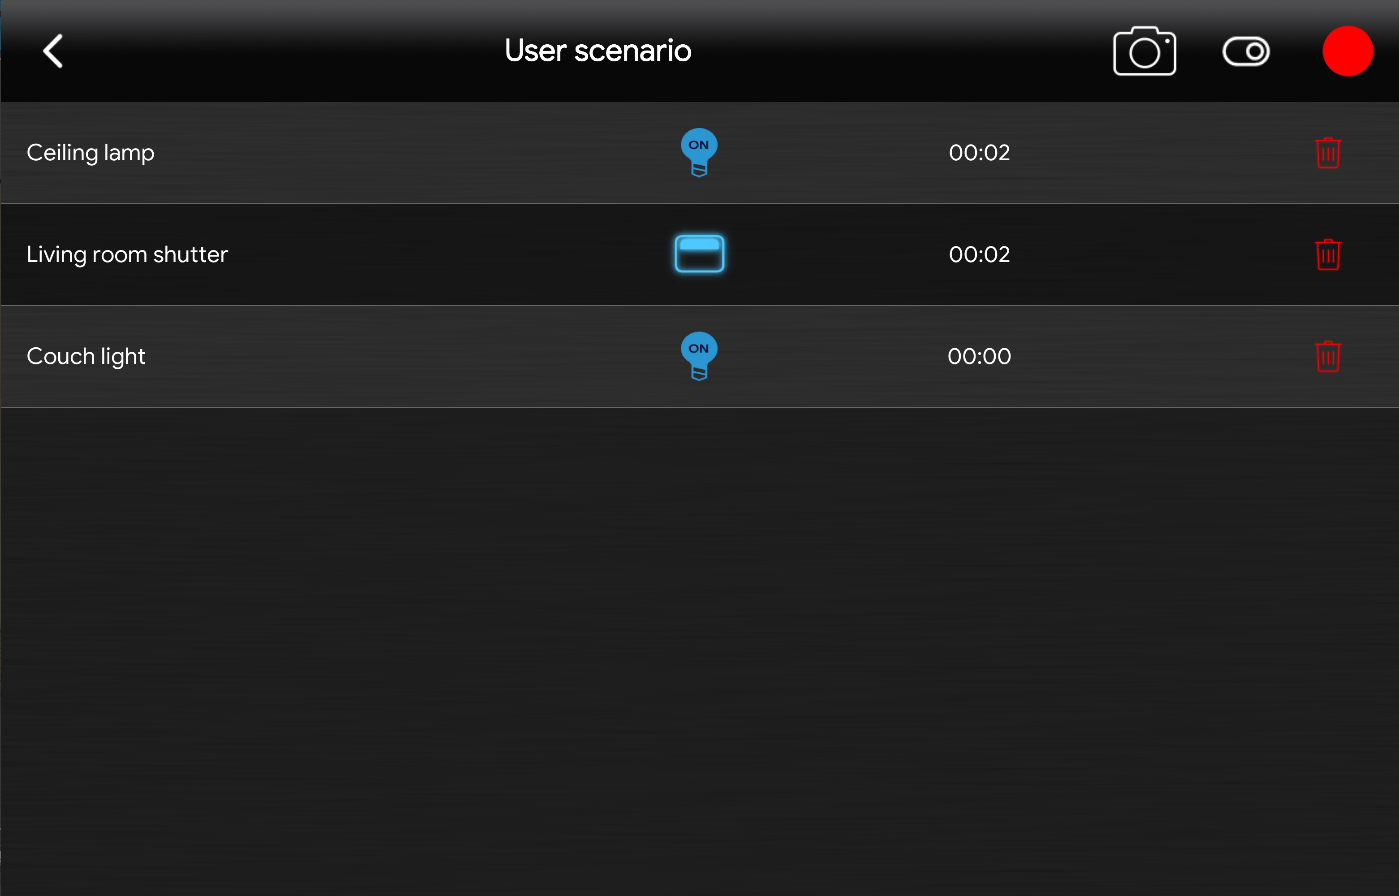 User scenario recording list within the map user interface of the Ilevia's Home automation App EVE Remote Plus